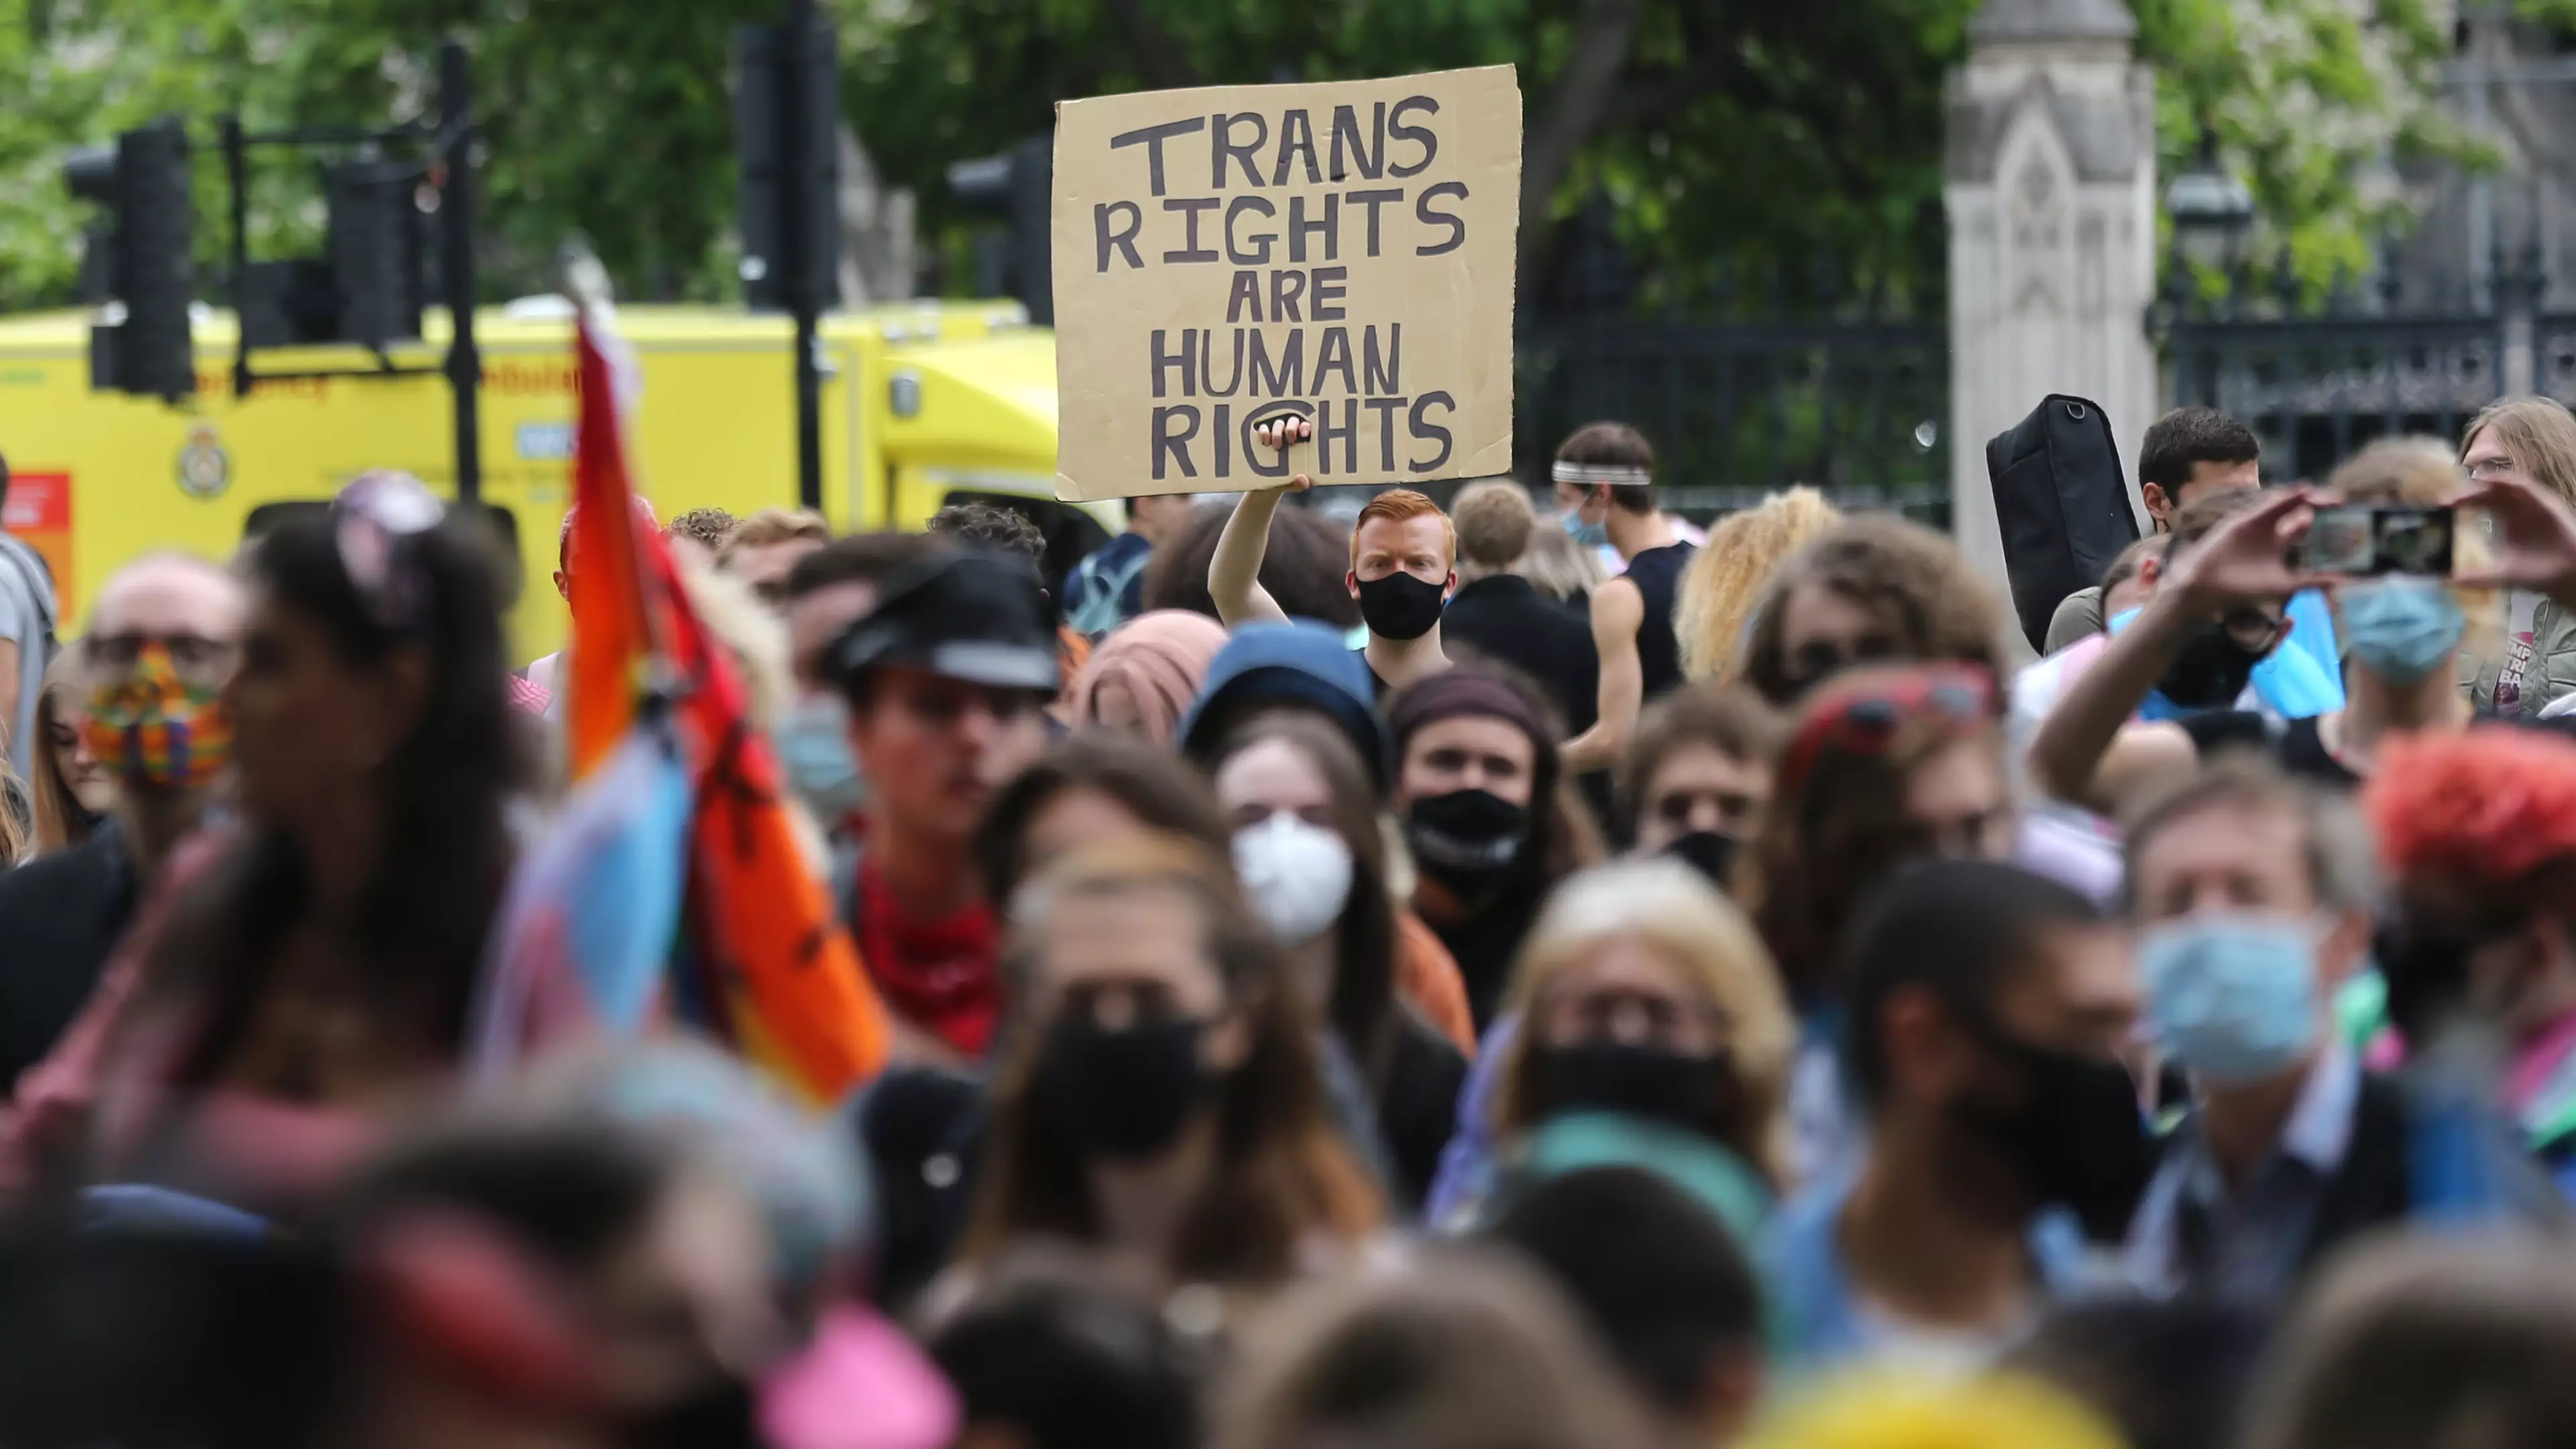 Cost Of Changing Your Legal Gender Reduced To £5 From Today